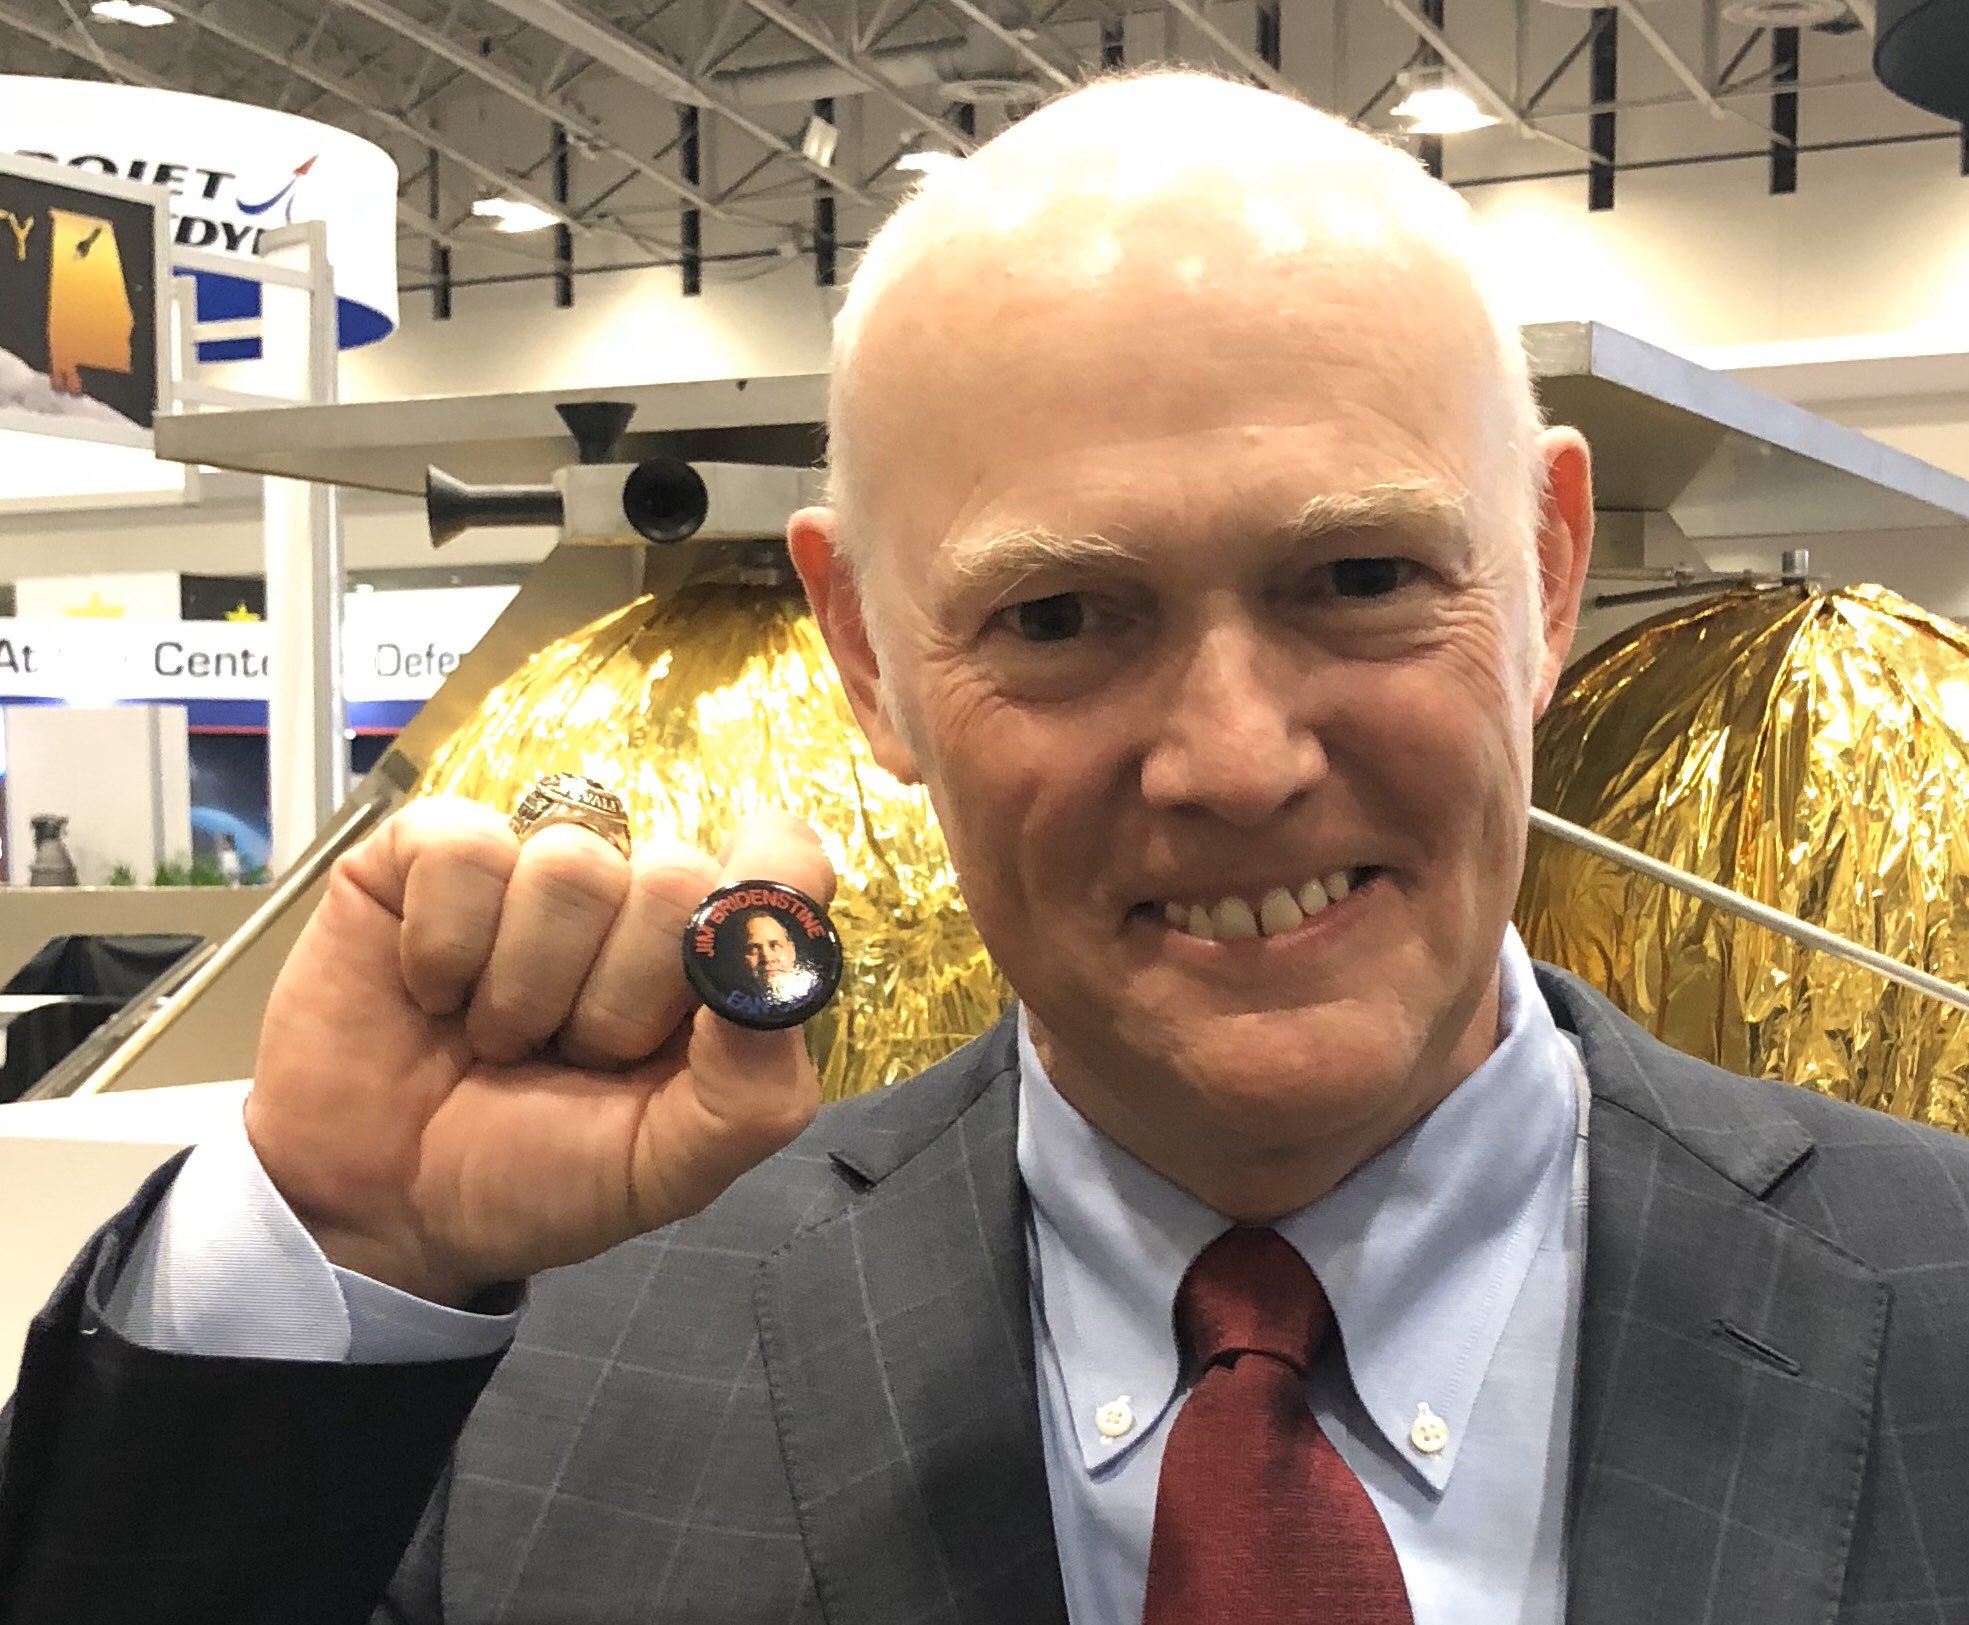 Tory Bruno, CEO, United Launch Alliance with JBFC Pin